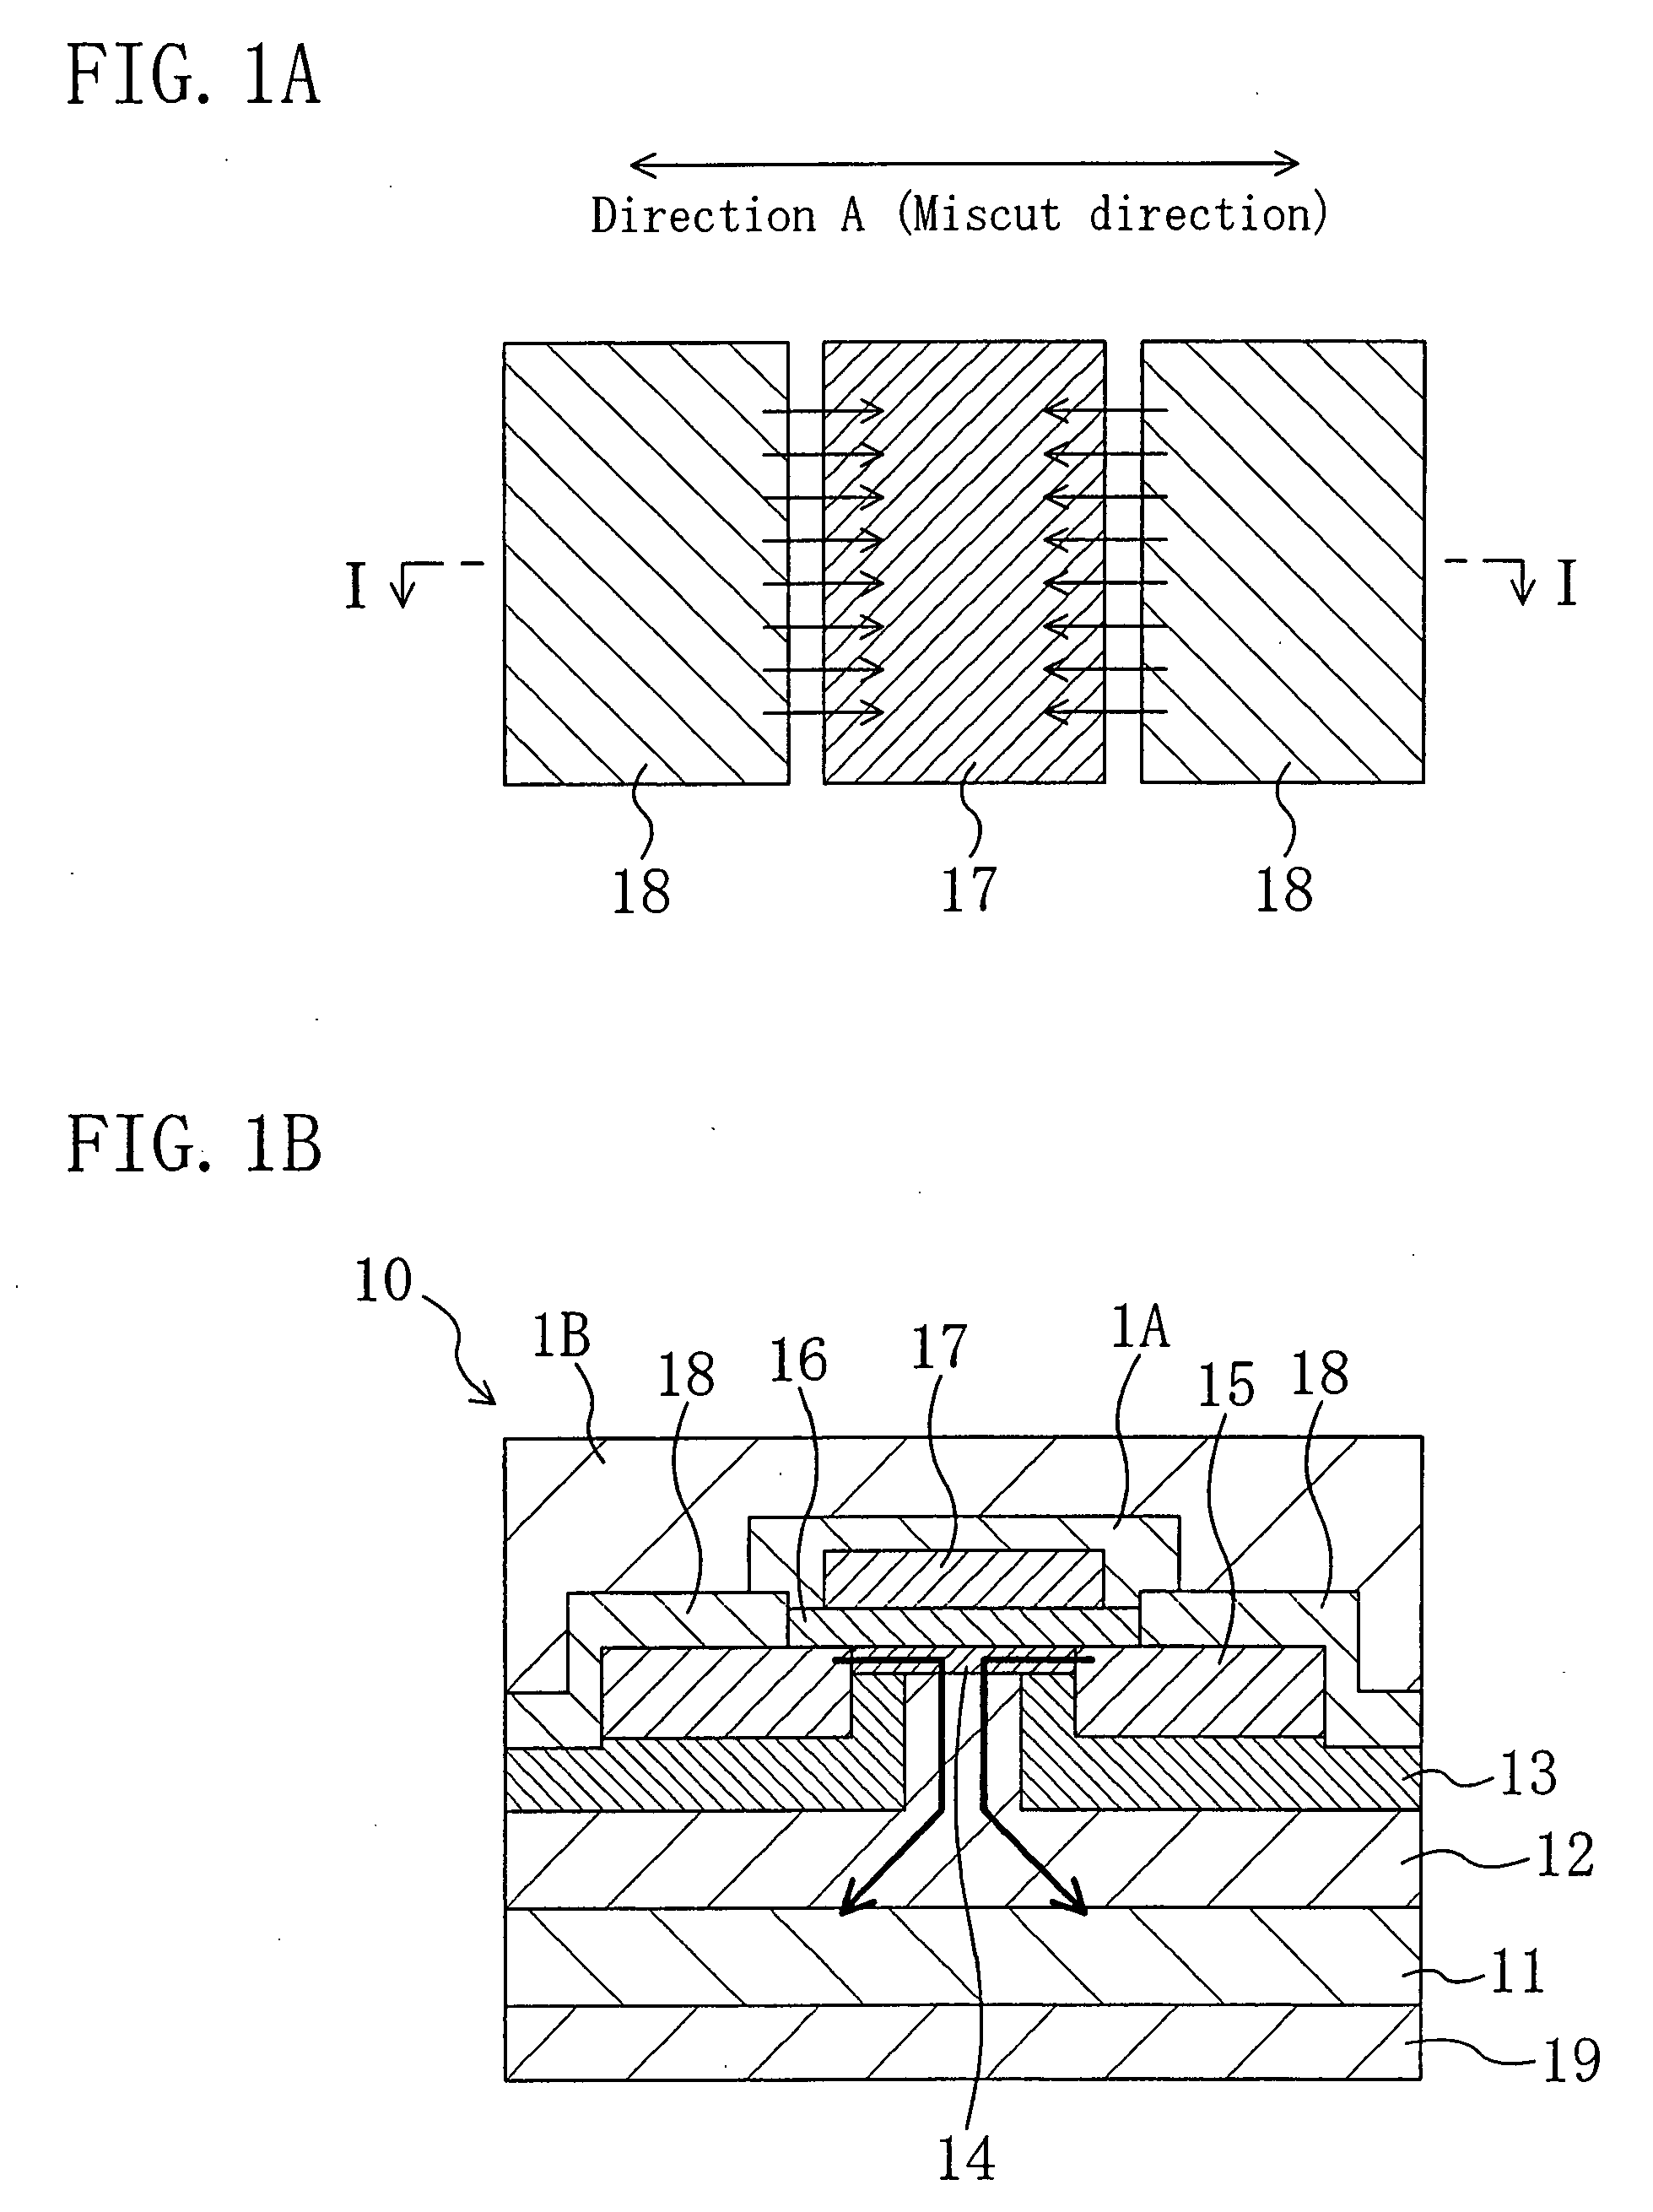 High-breakdown-voltage insulated gate semiconductor device